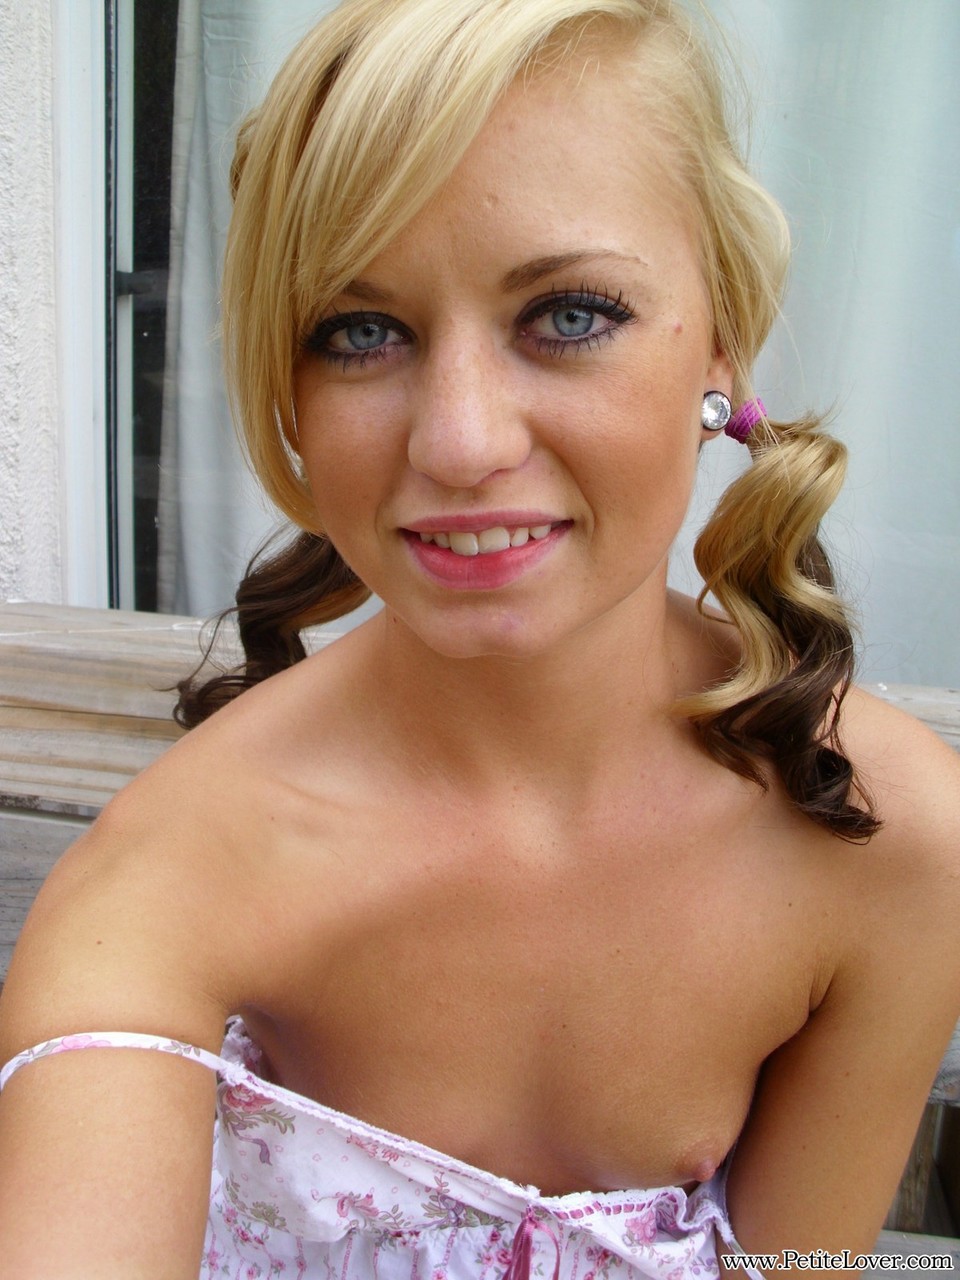 Cute blonde Tiff in pigtails showing off her wee small tits & tiny bald pussy foto porno #428478640